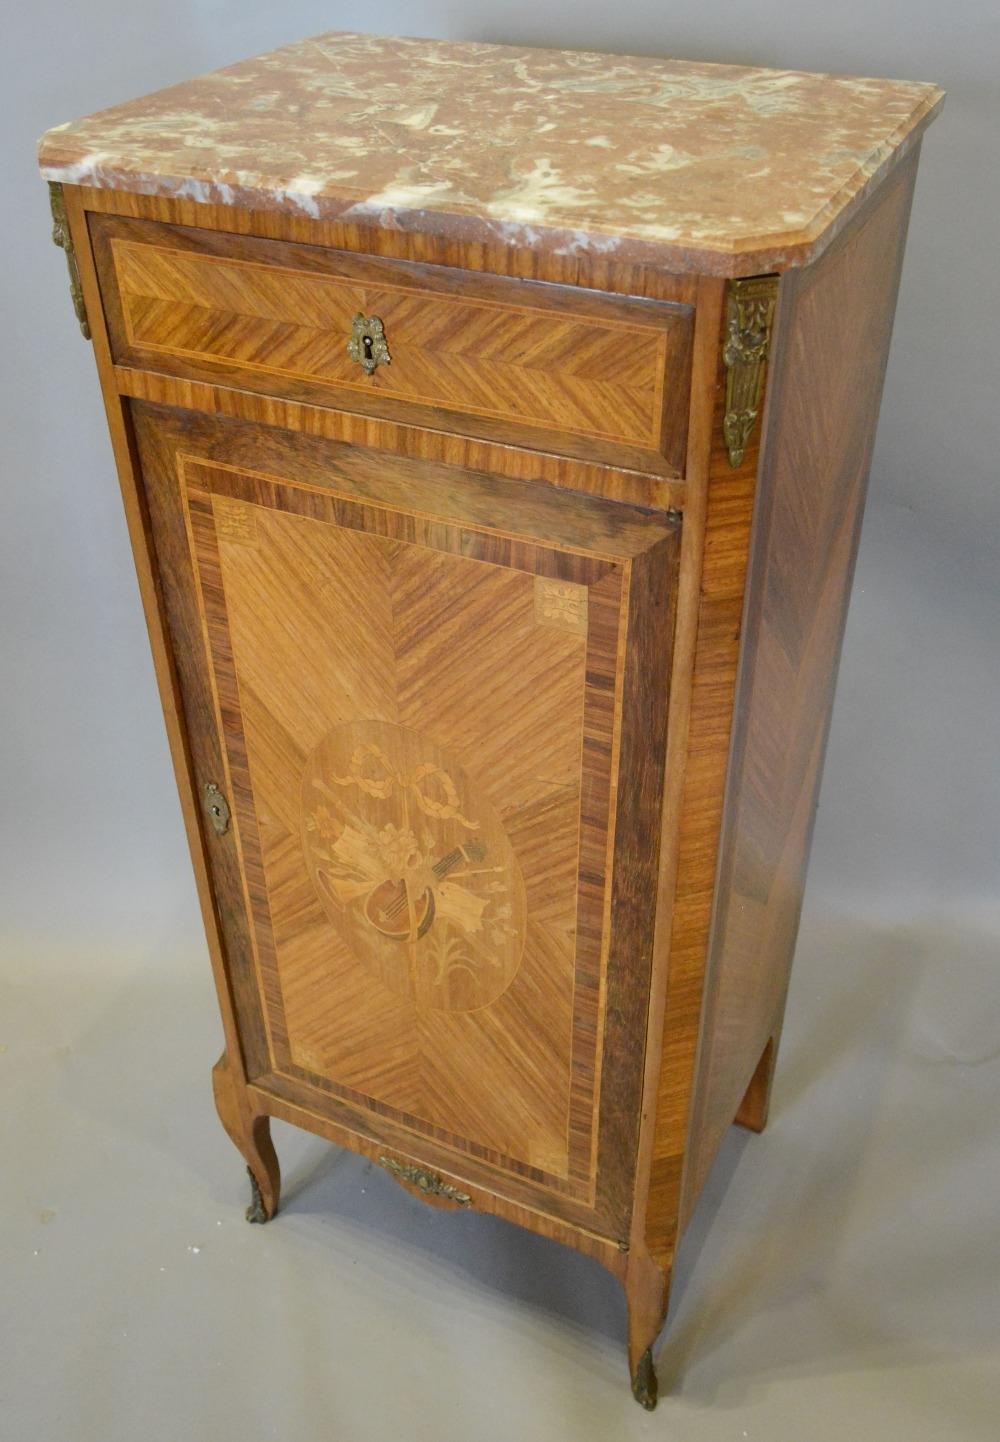 A French Kingwood and Marquetry Inlaid Side Cabinet with a Rouge Marble top above a frieze drawer - Image 2 of 3